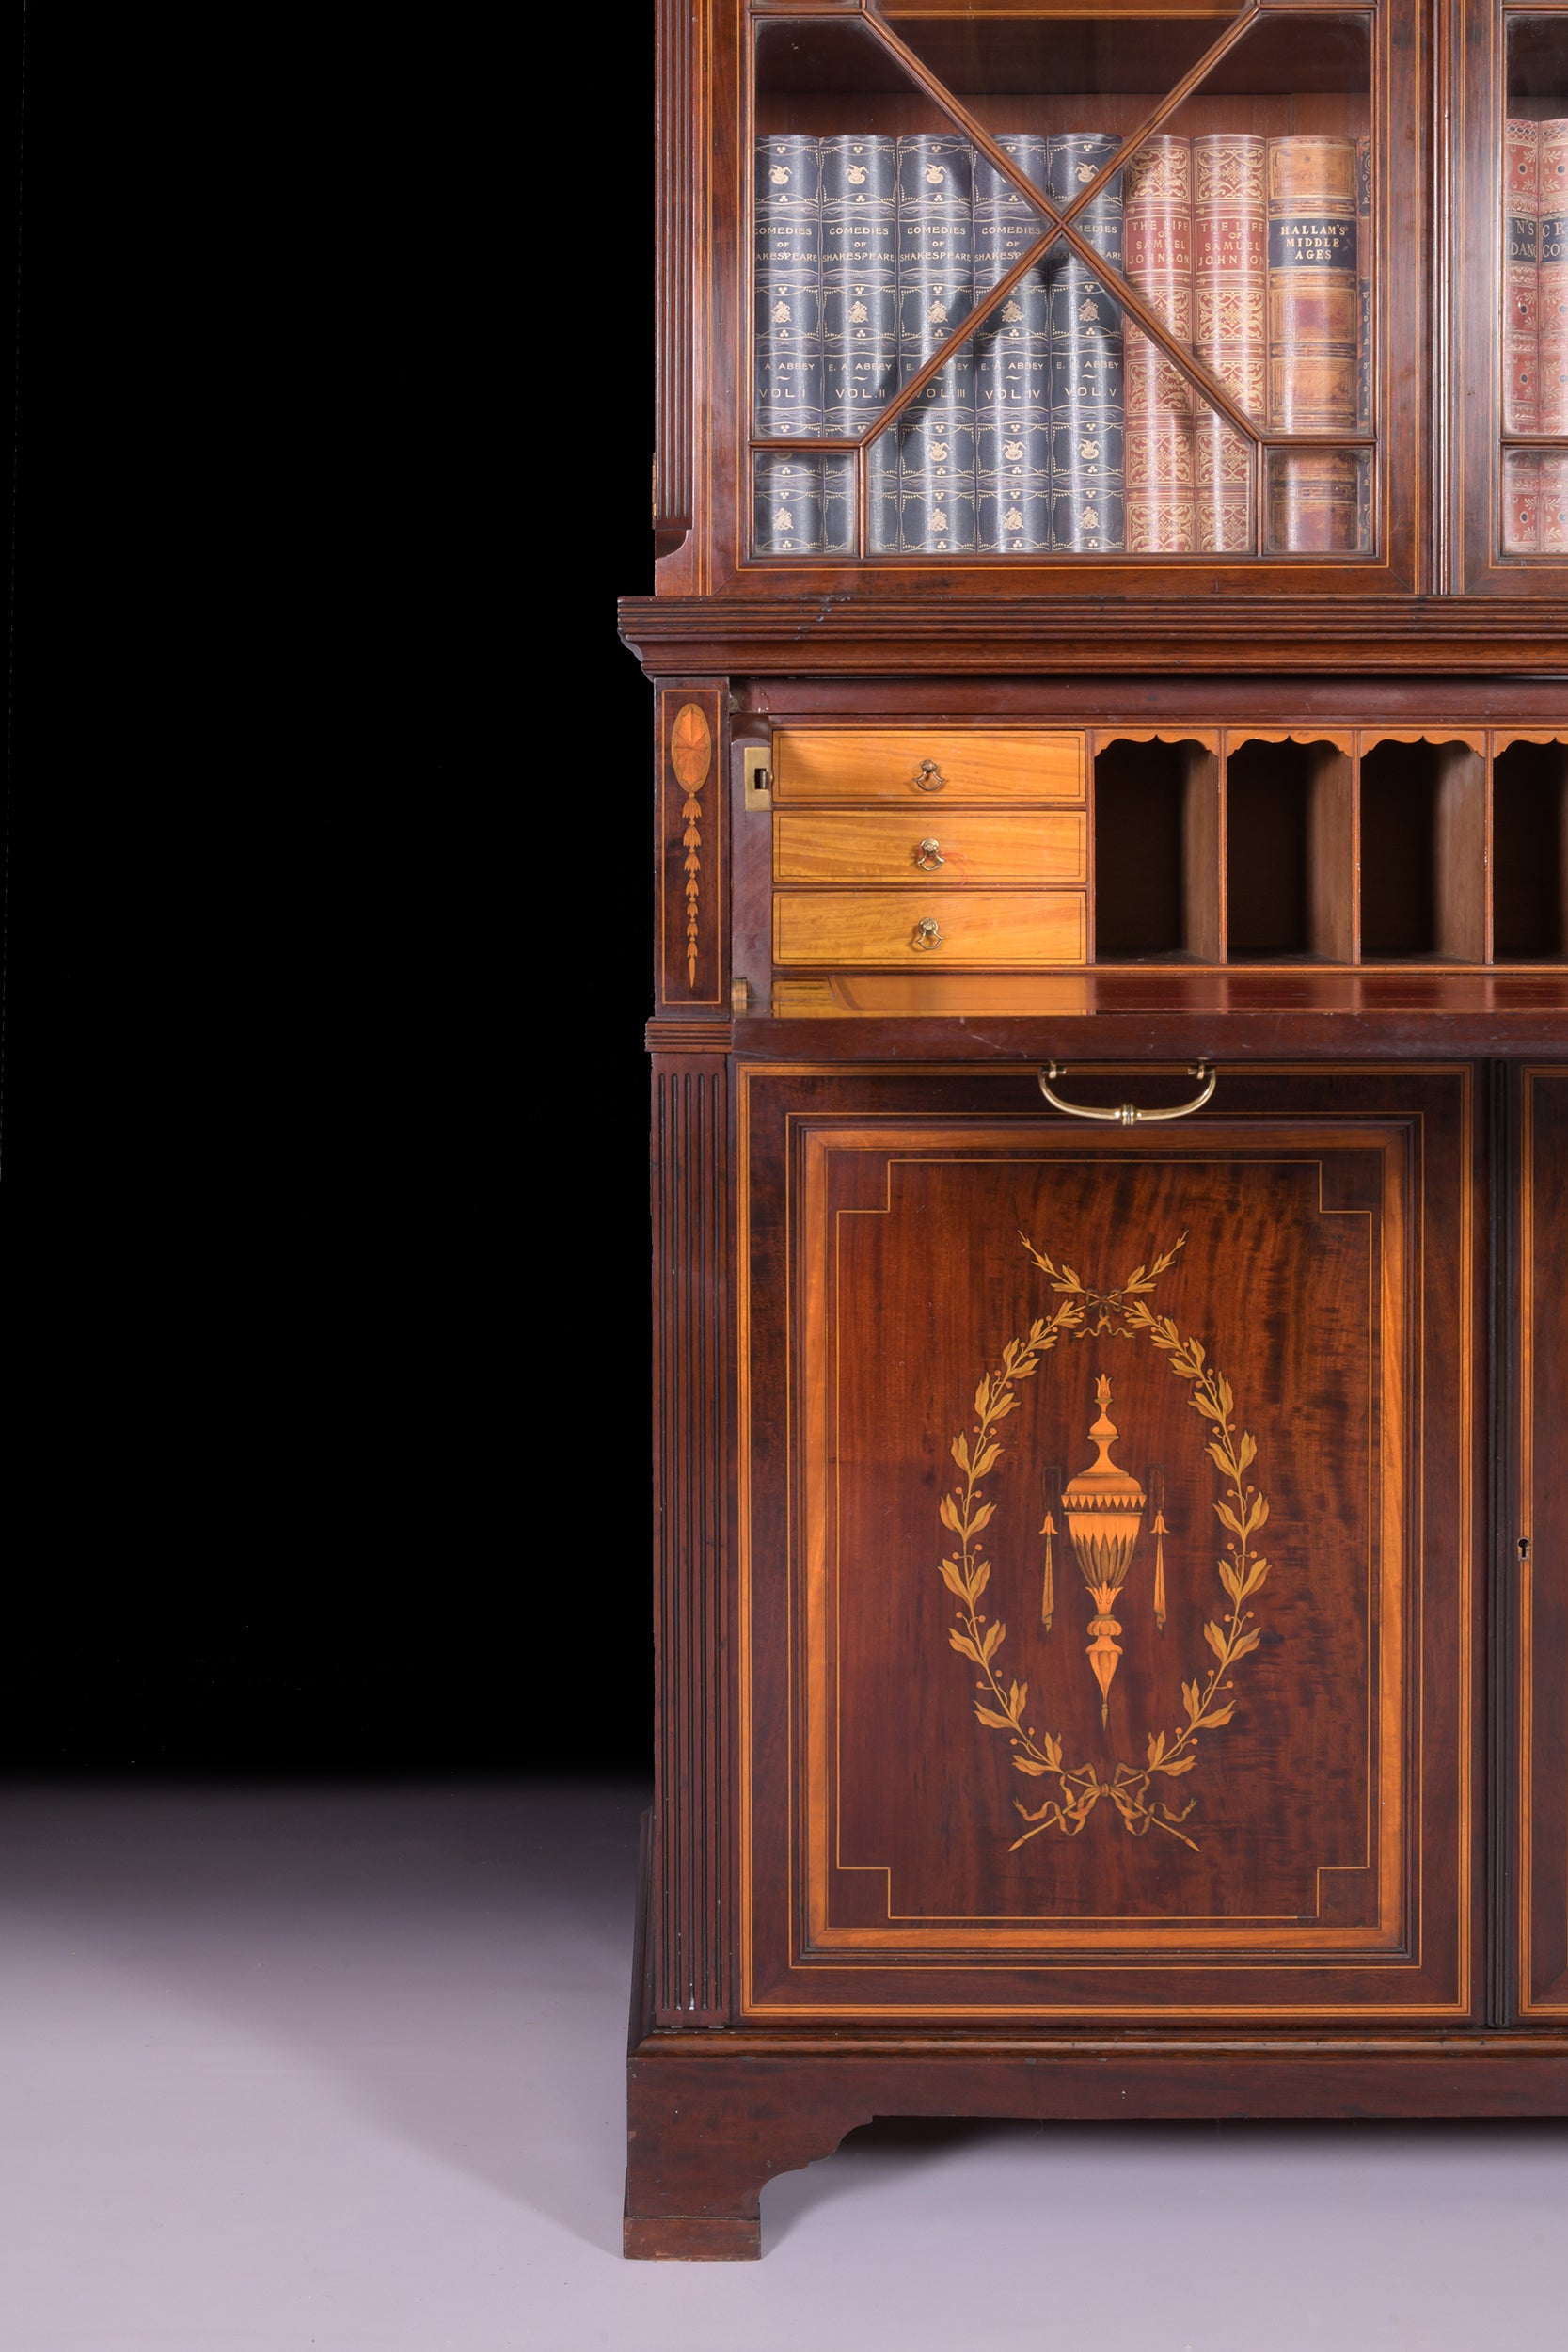 SECRETAIRE BOOKCASE STAMPED EDWARDS & ROBERTS OF LONDON - REF No. 4053